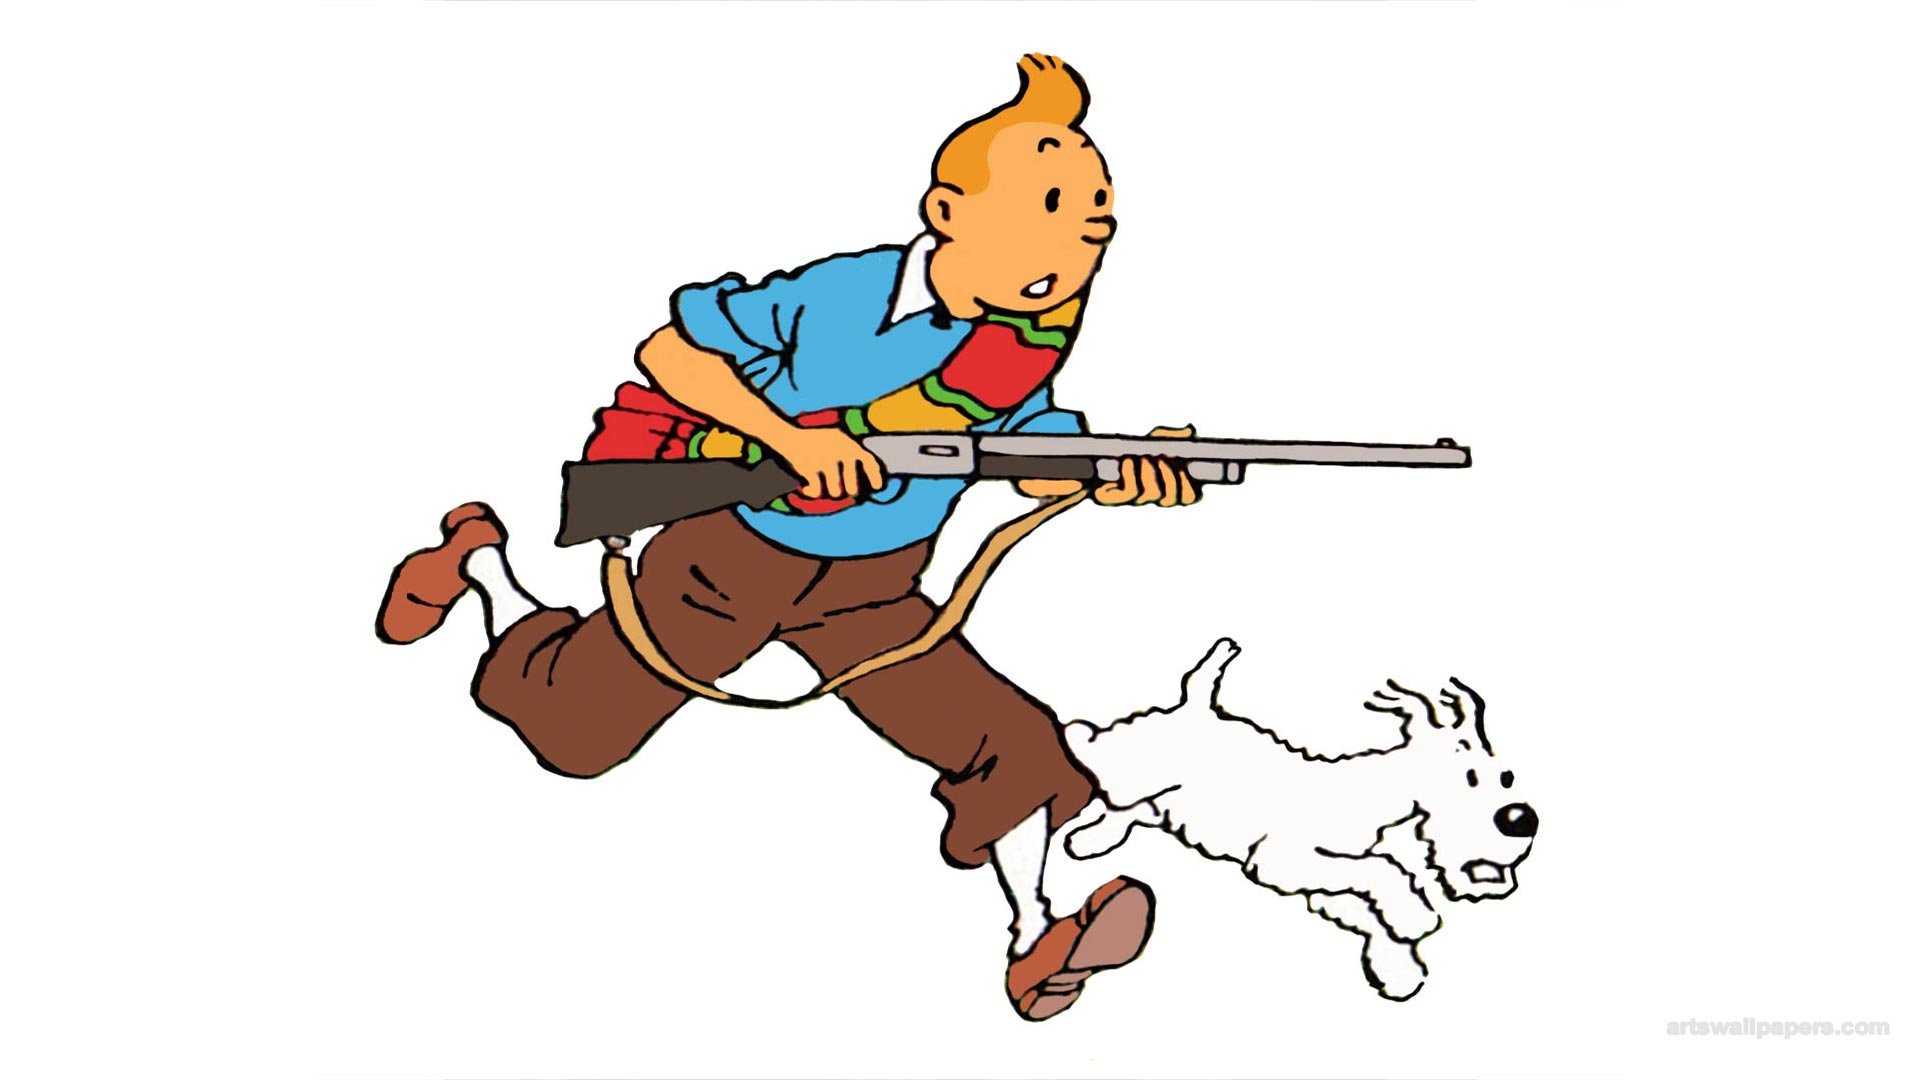 Tintin Widescreen and Full HD Backgrounds